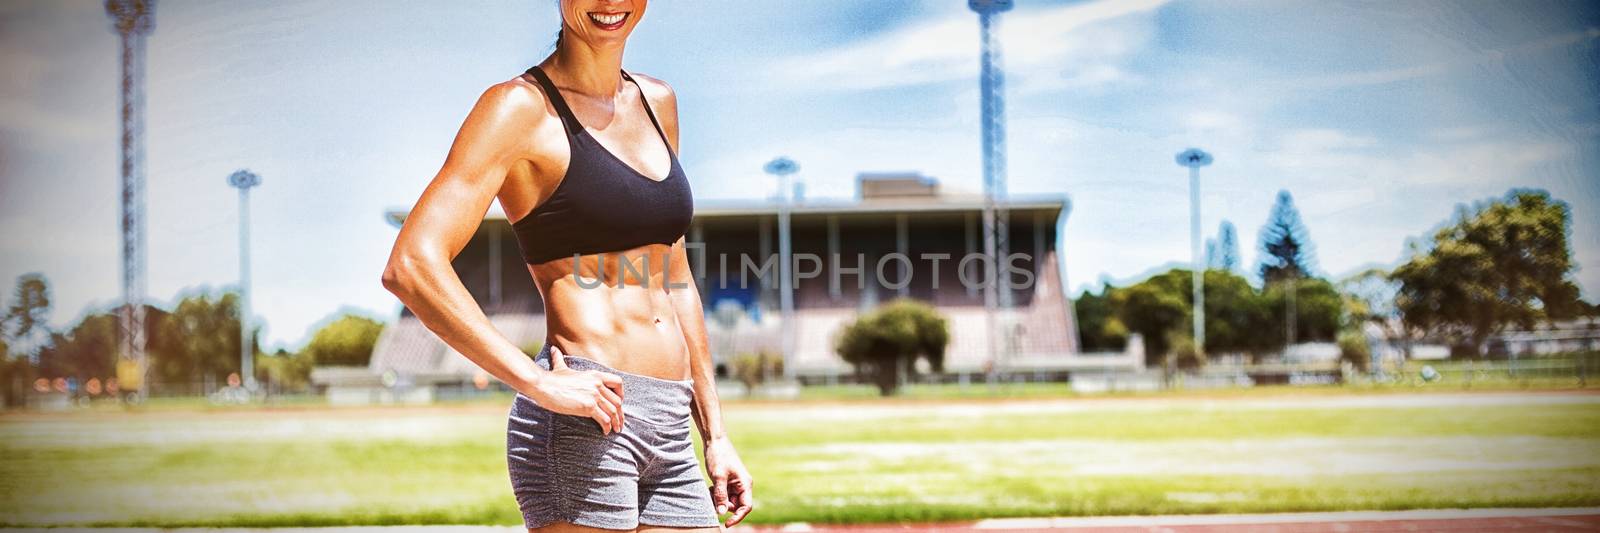 Portrait of female athlete standing in running track with hands on hips